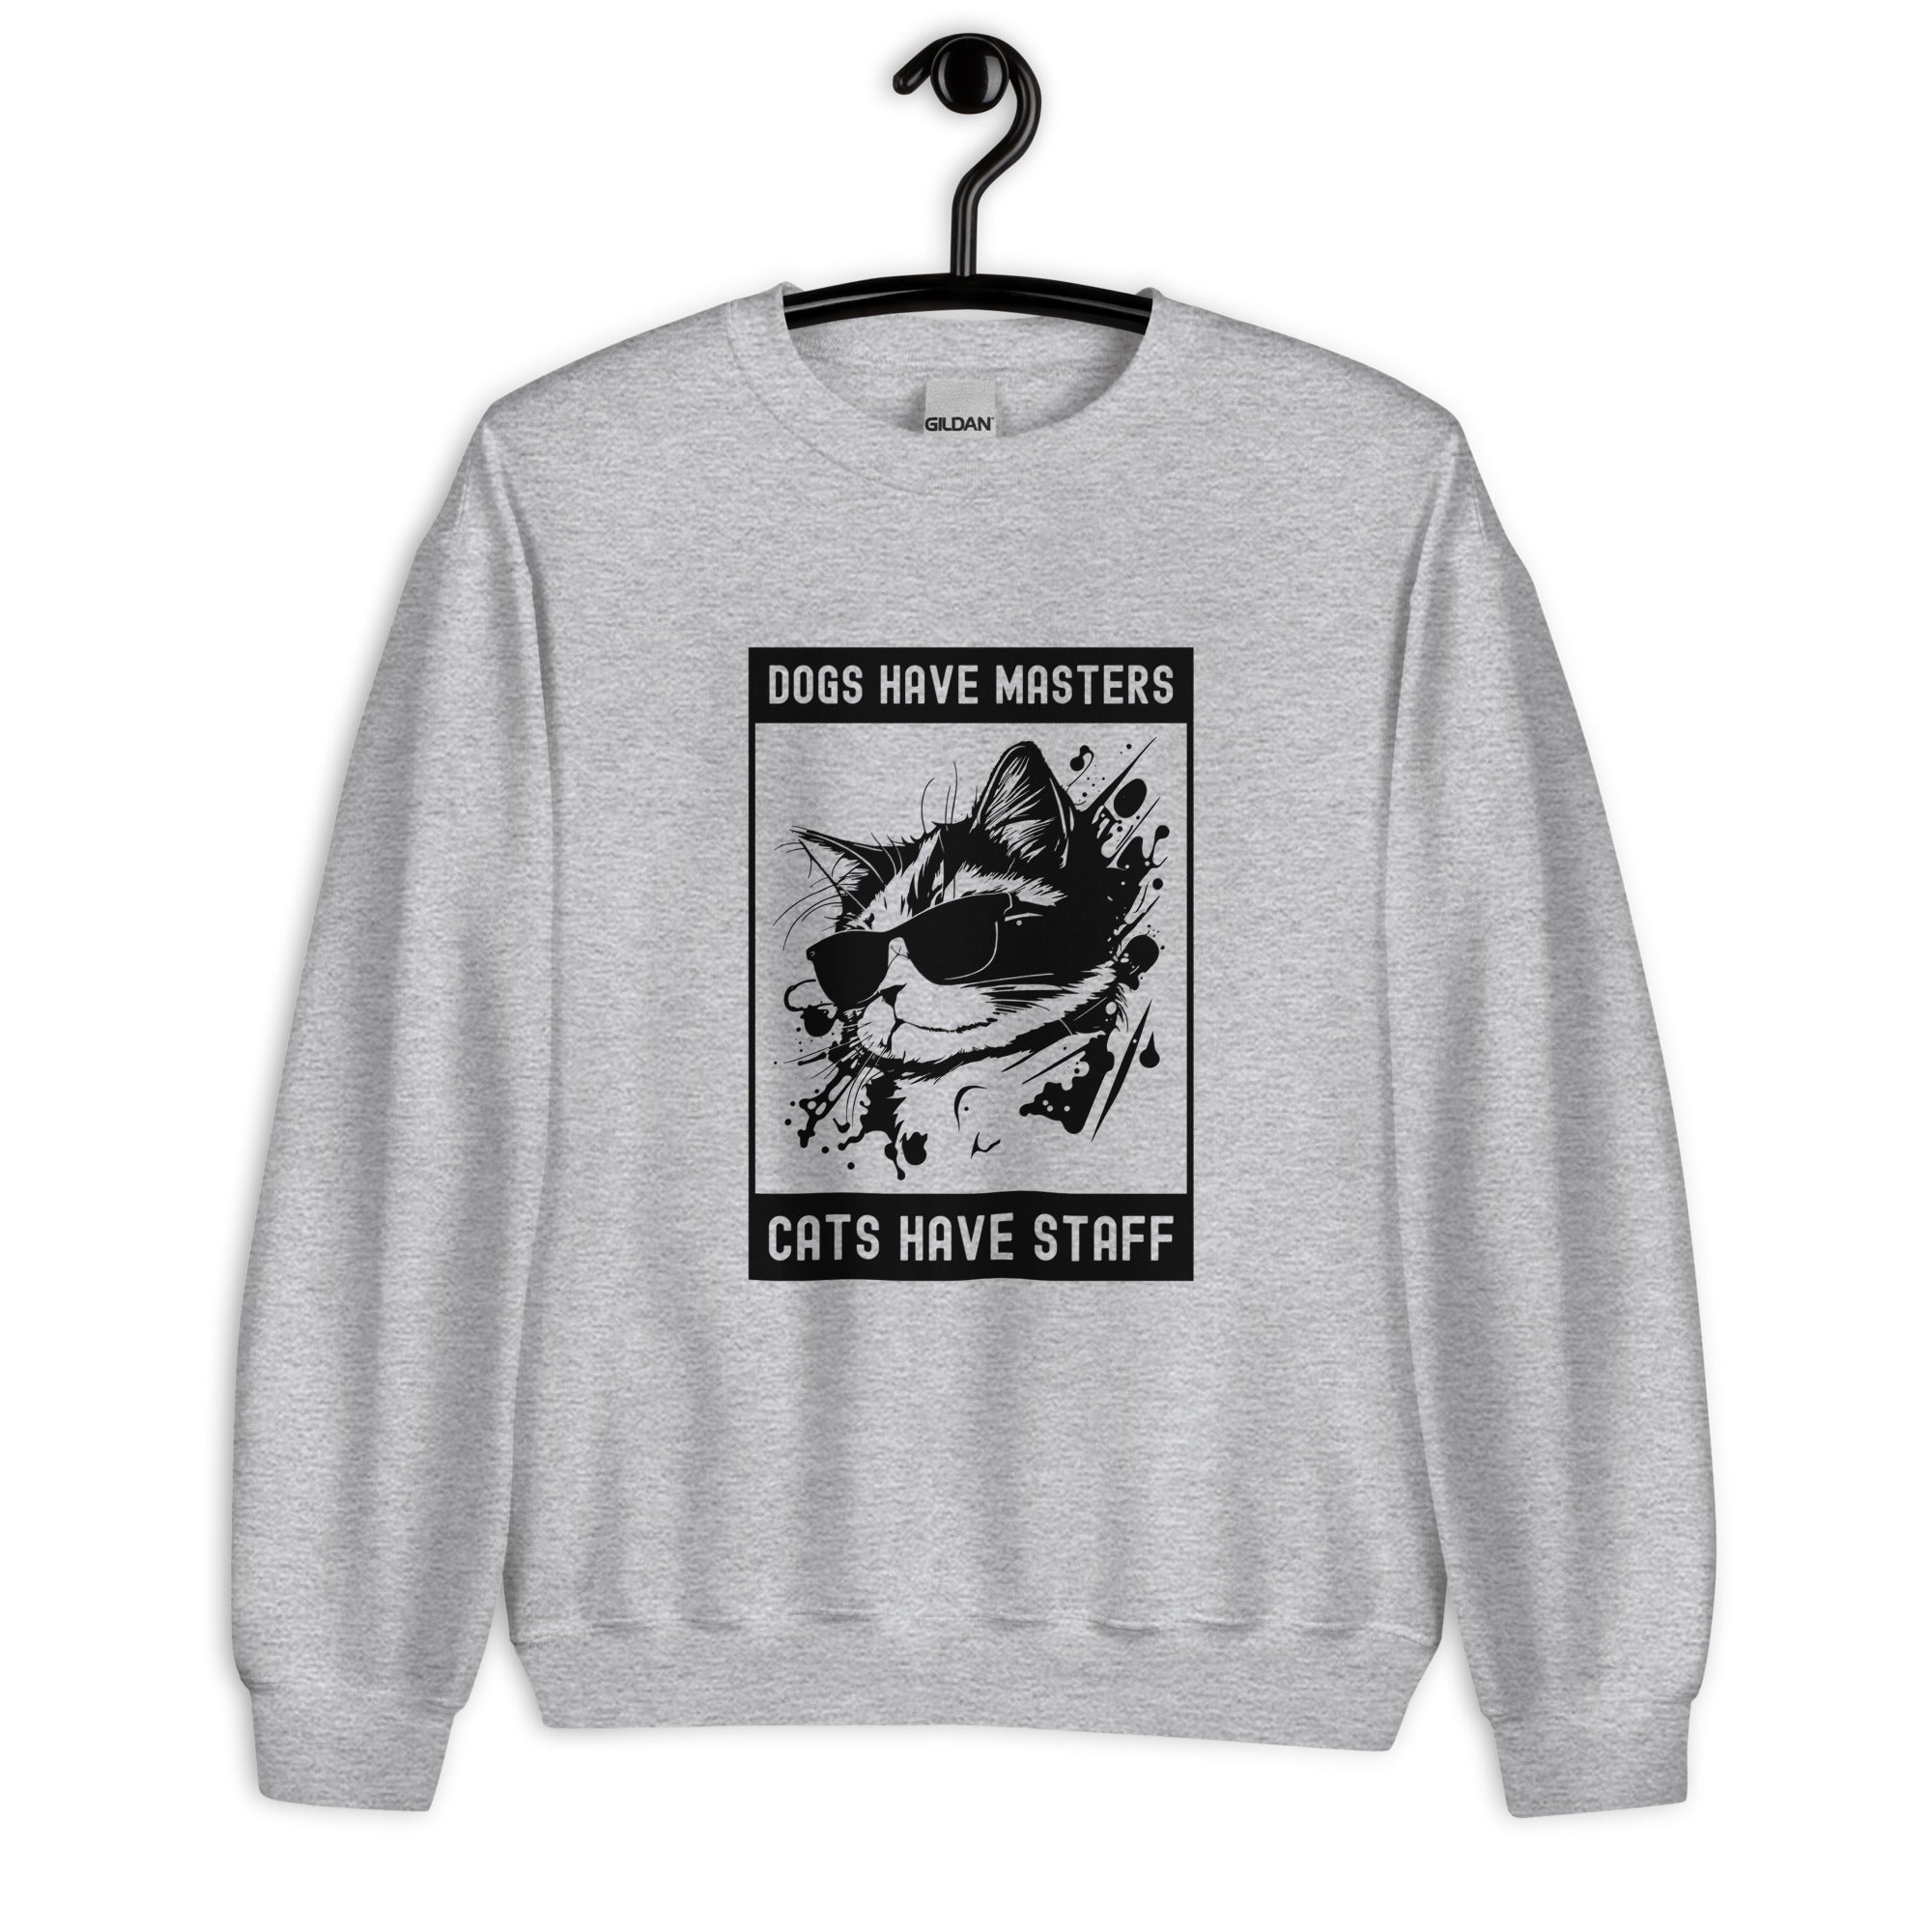 Unisex Sweatshirt | Dogs have masters cats have staff